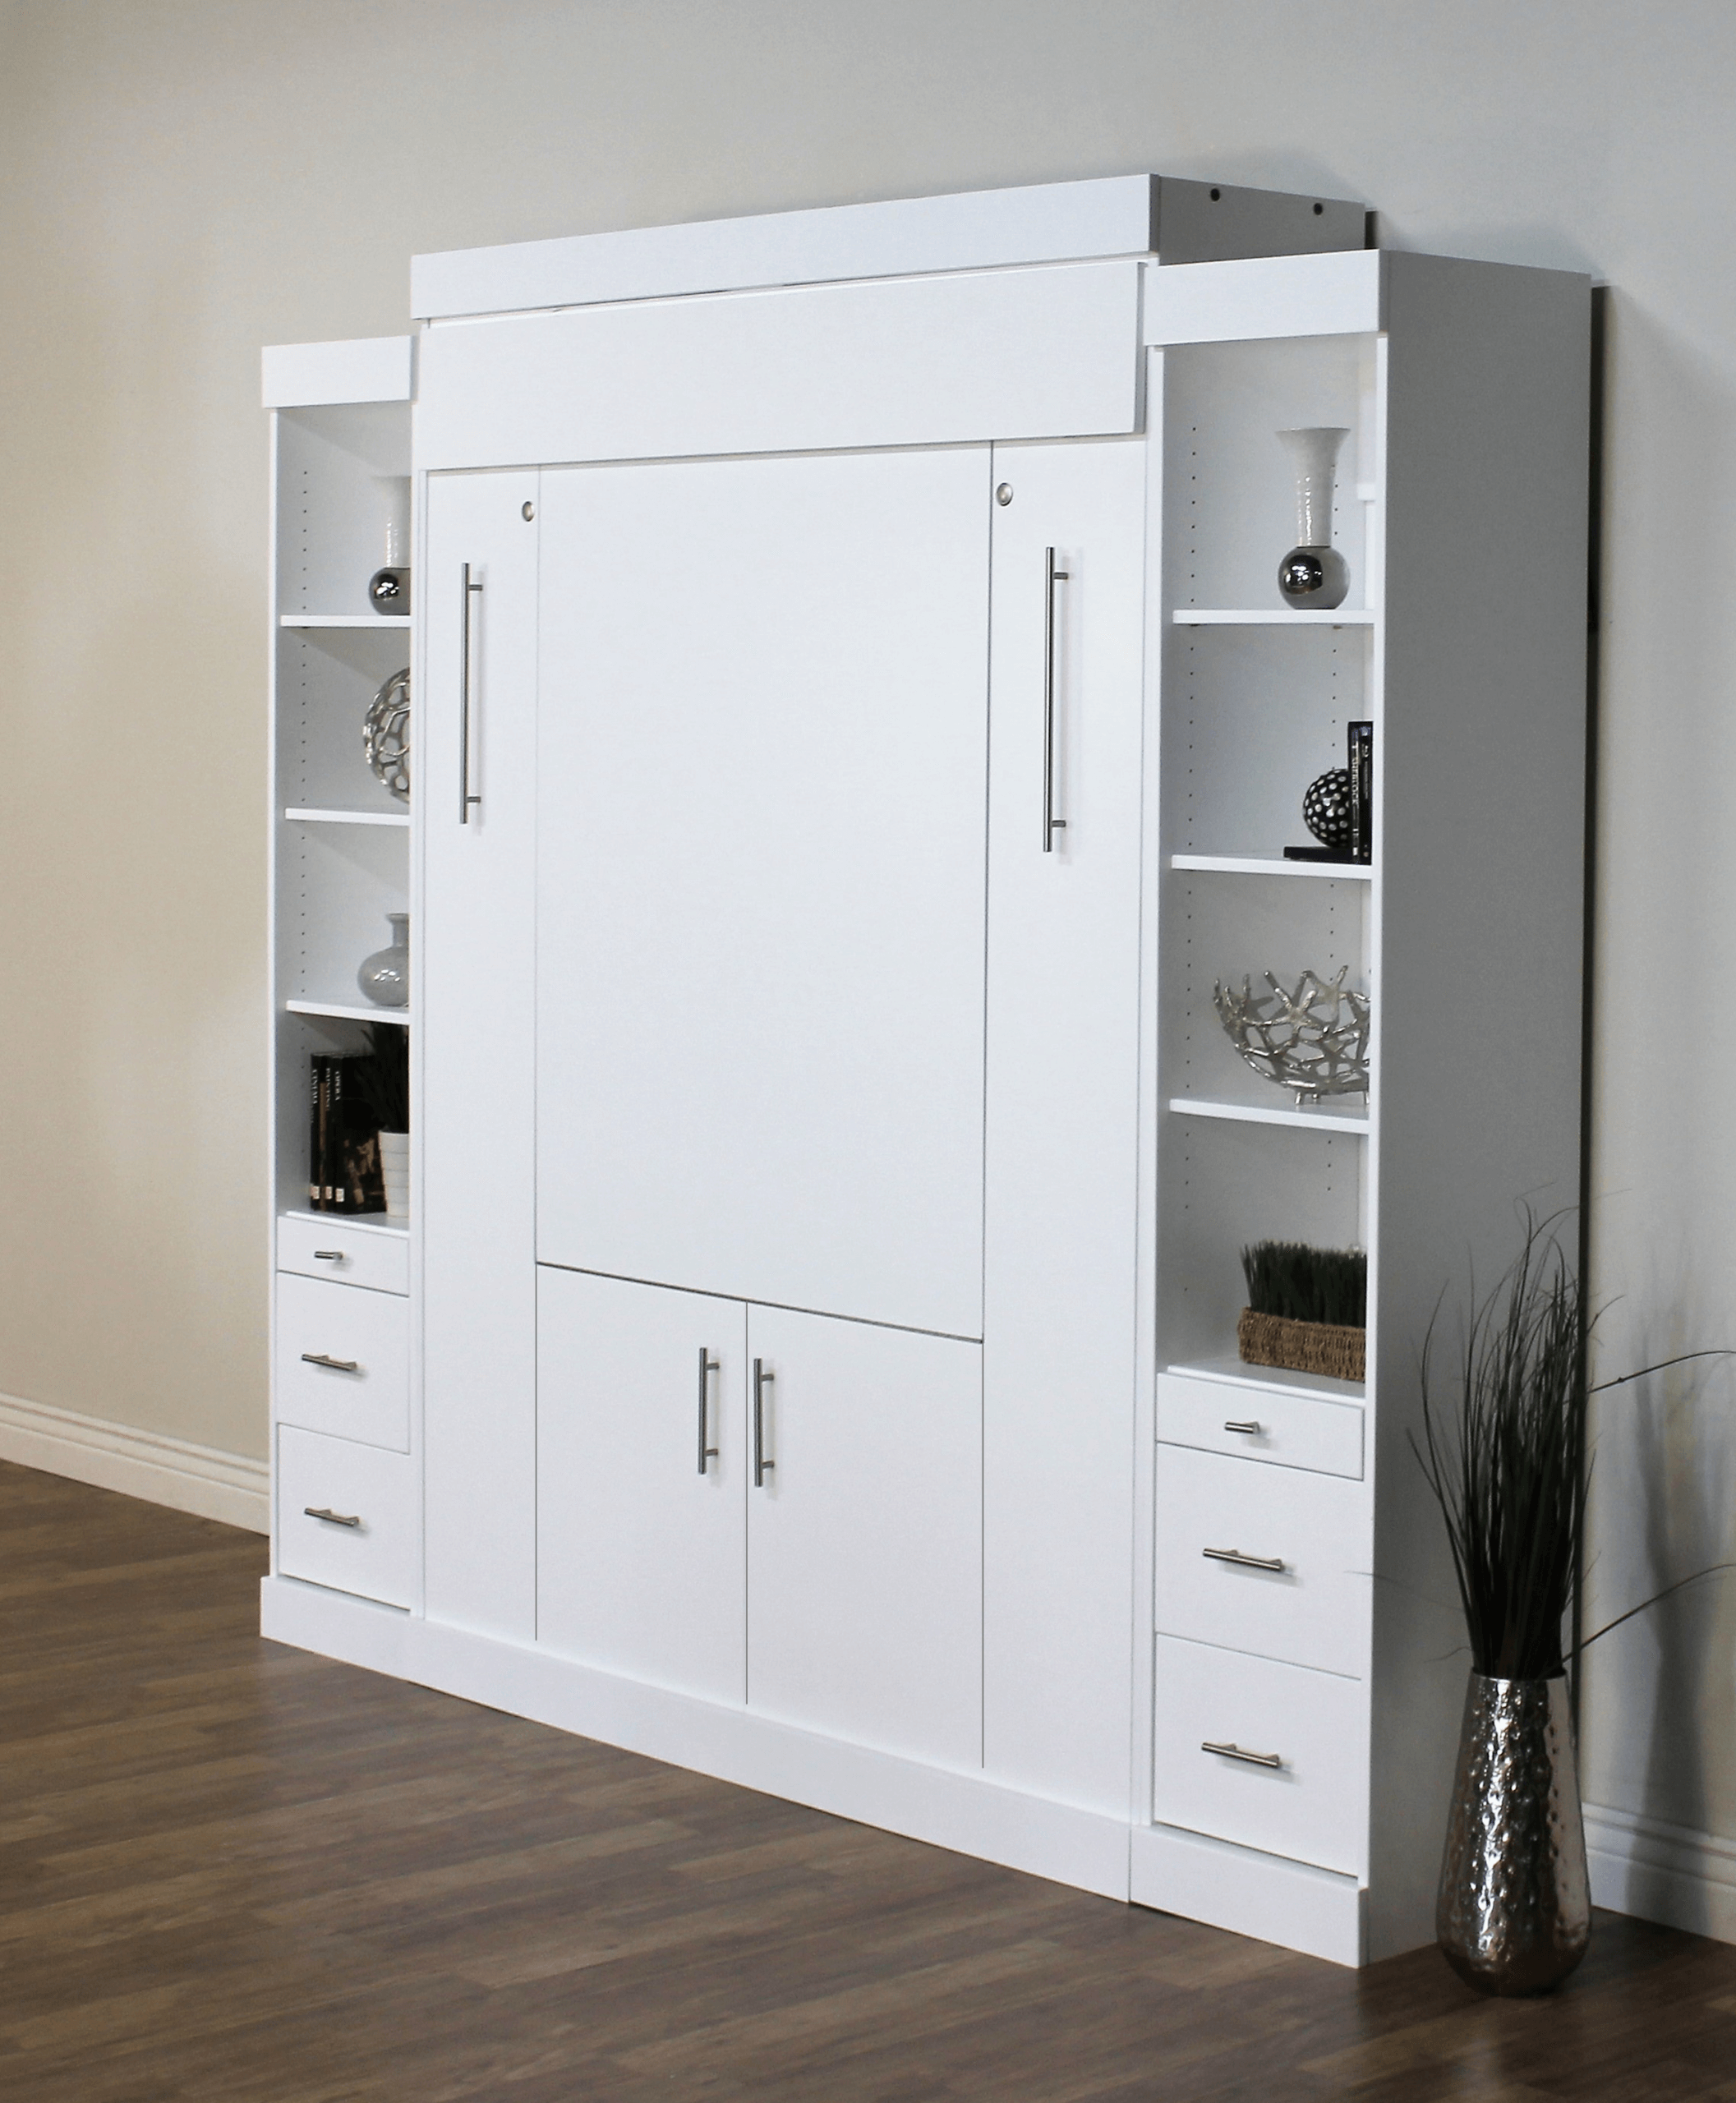 Euro Table Bed In White - Closed Murphy Bed